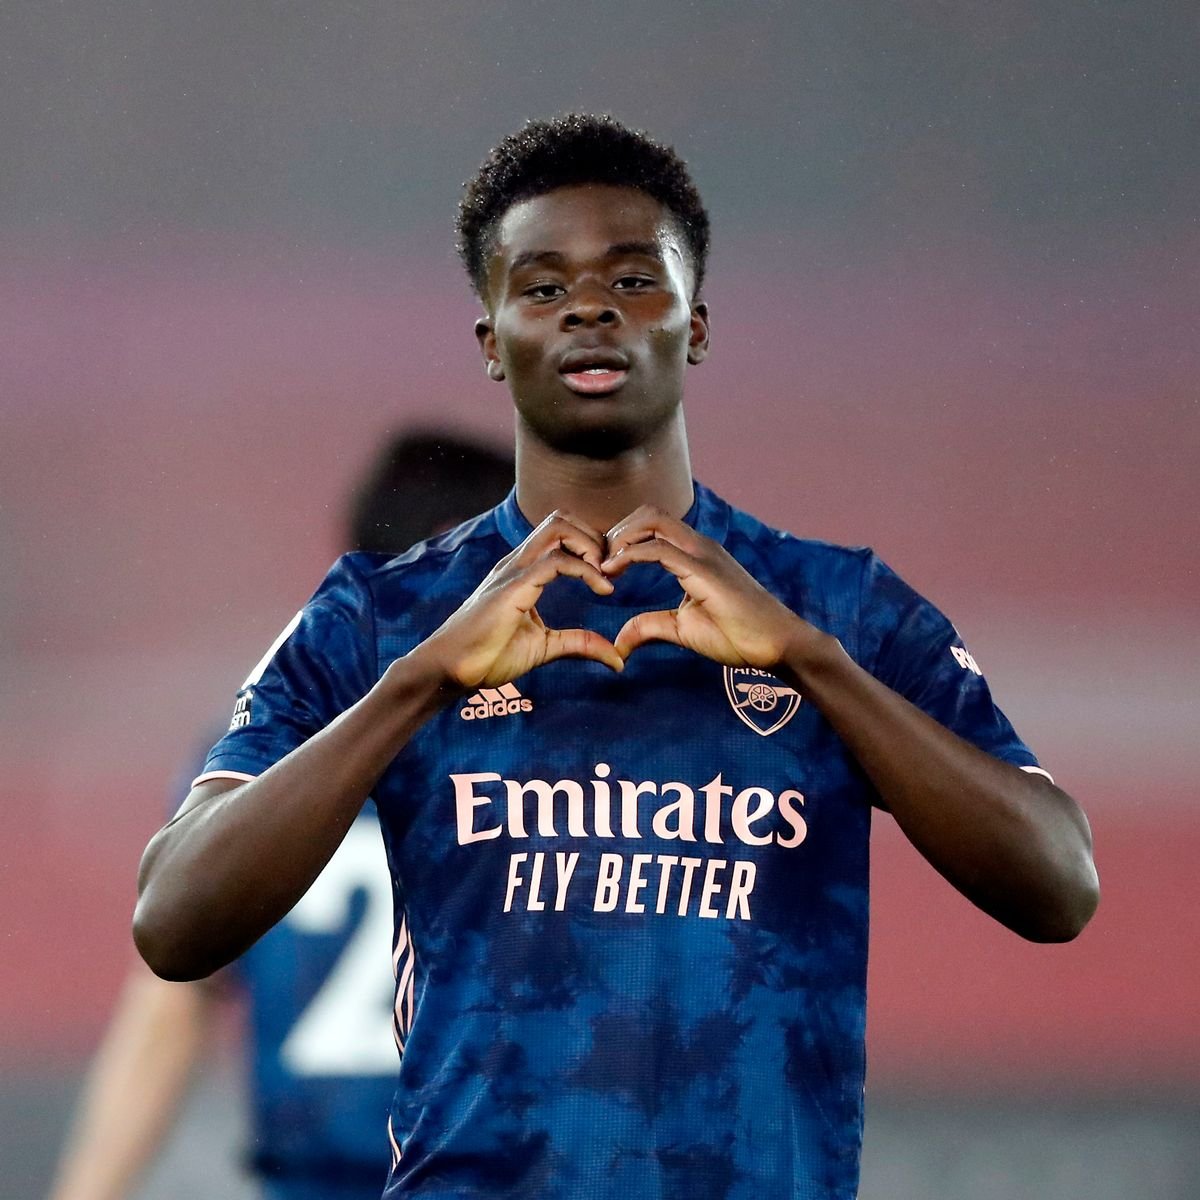 Gunners on Twitter: "Bukayo Saka: "God's been taking care of me. Some  tackles, I could have been lucky but I wouldn't call it luck. I believe in  God and he's taking care